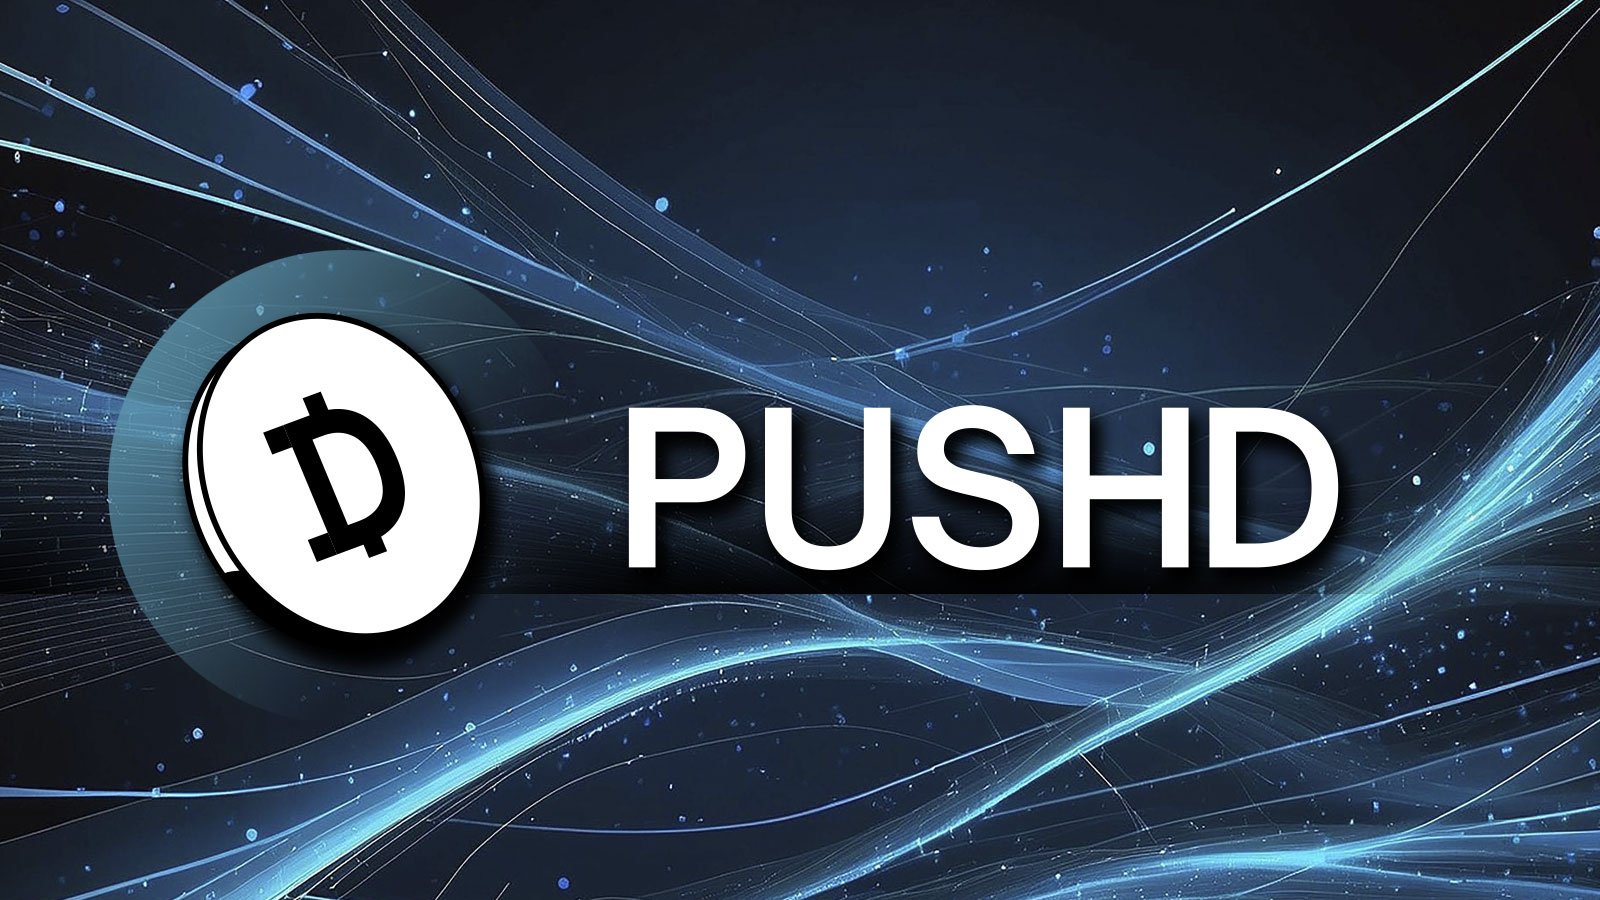 Pushd (PUSHD) Token Sale Might be Spotlighted by Altcoiners in April as VeChain (VET), Filecoin (FIL) Major Altcoins Set Trading Metrics High